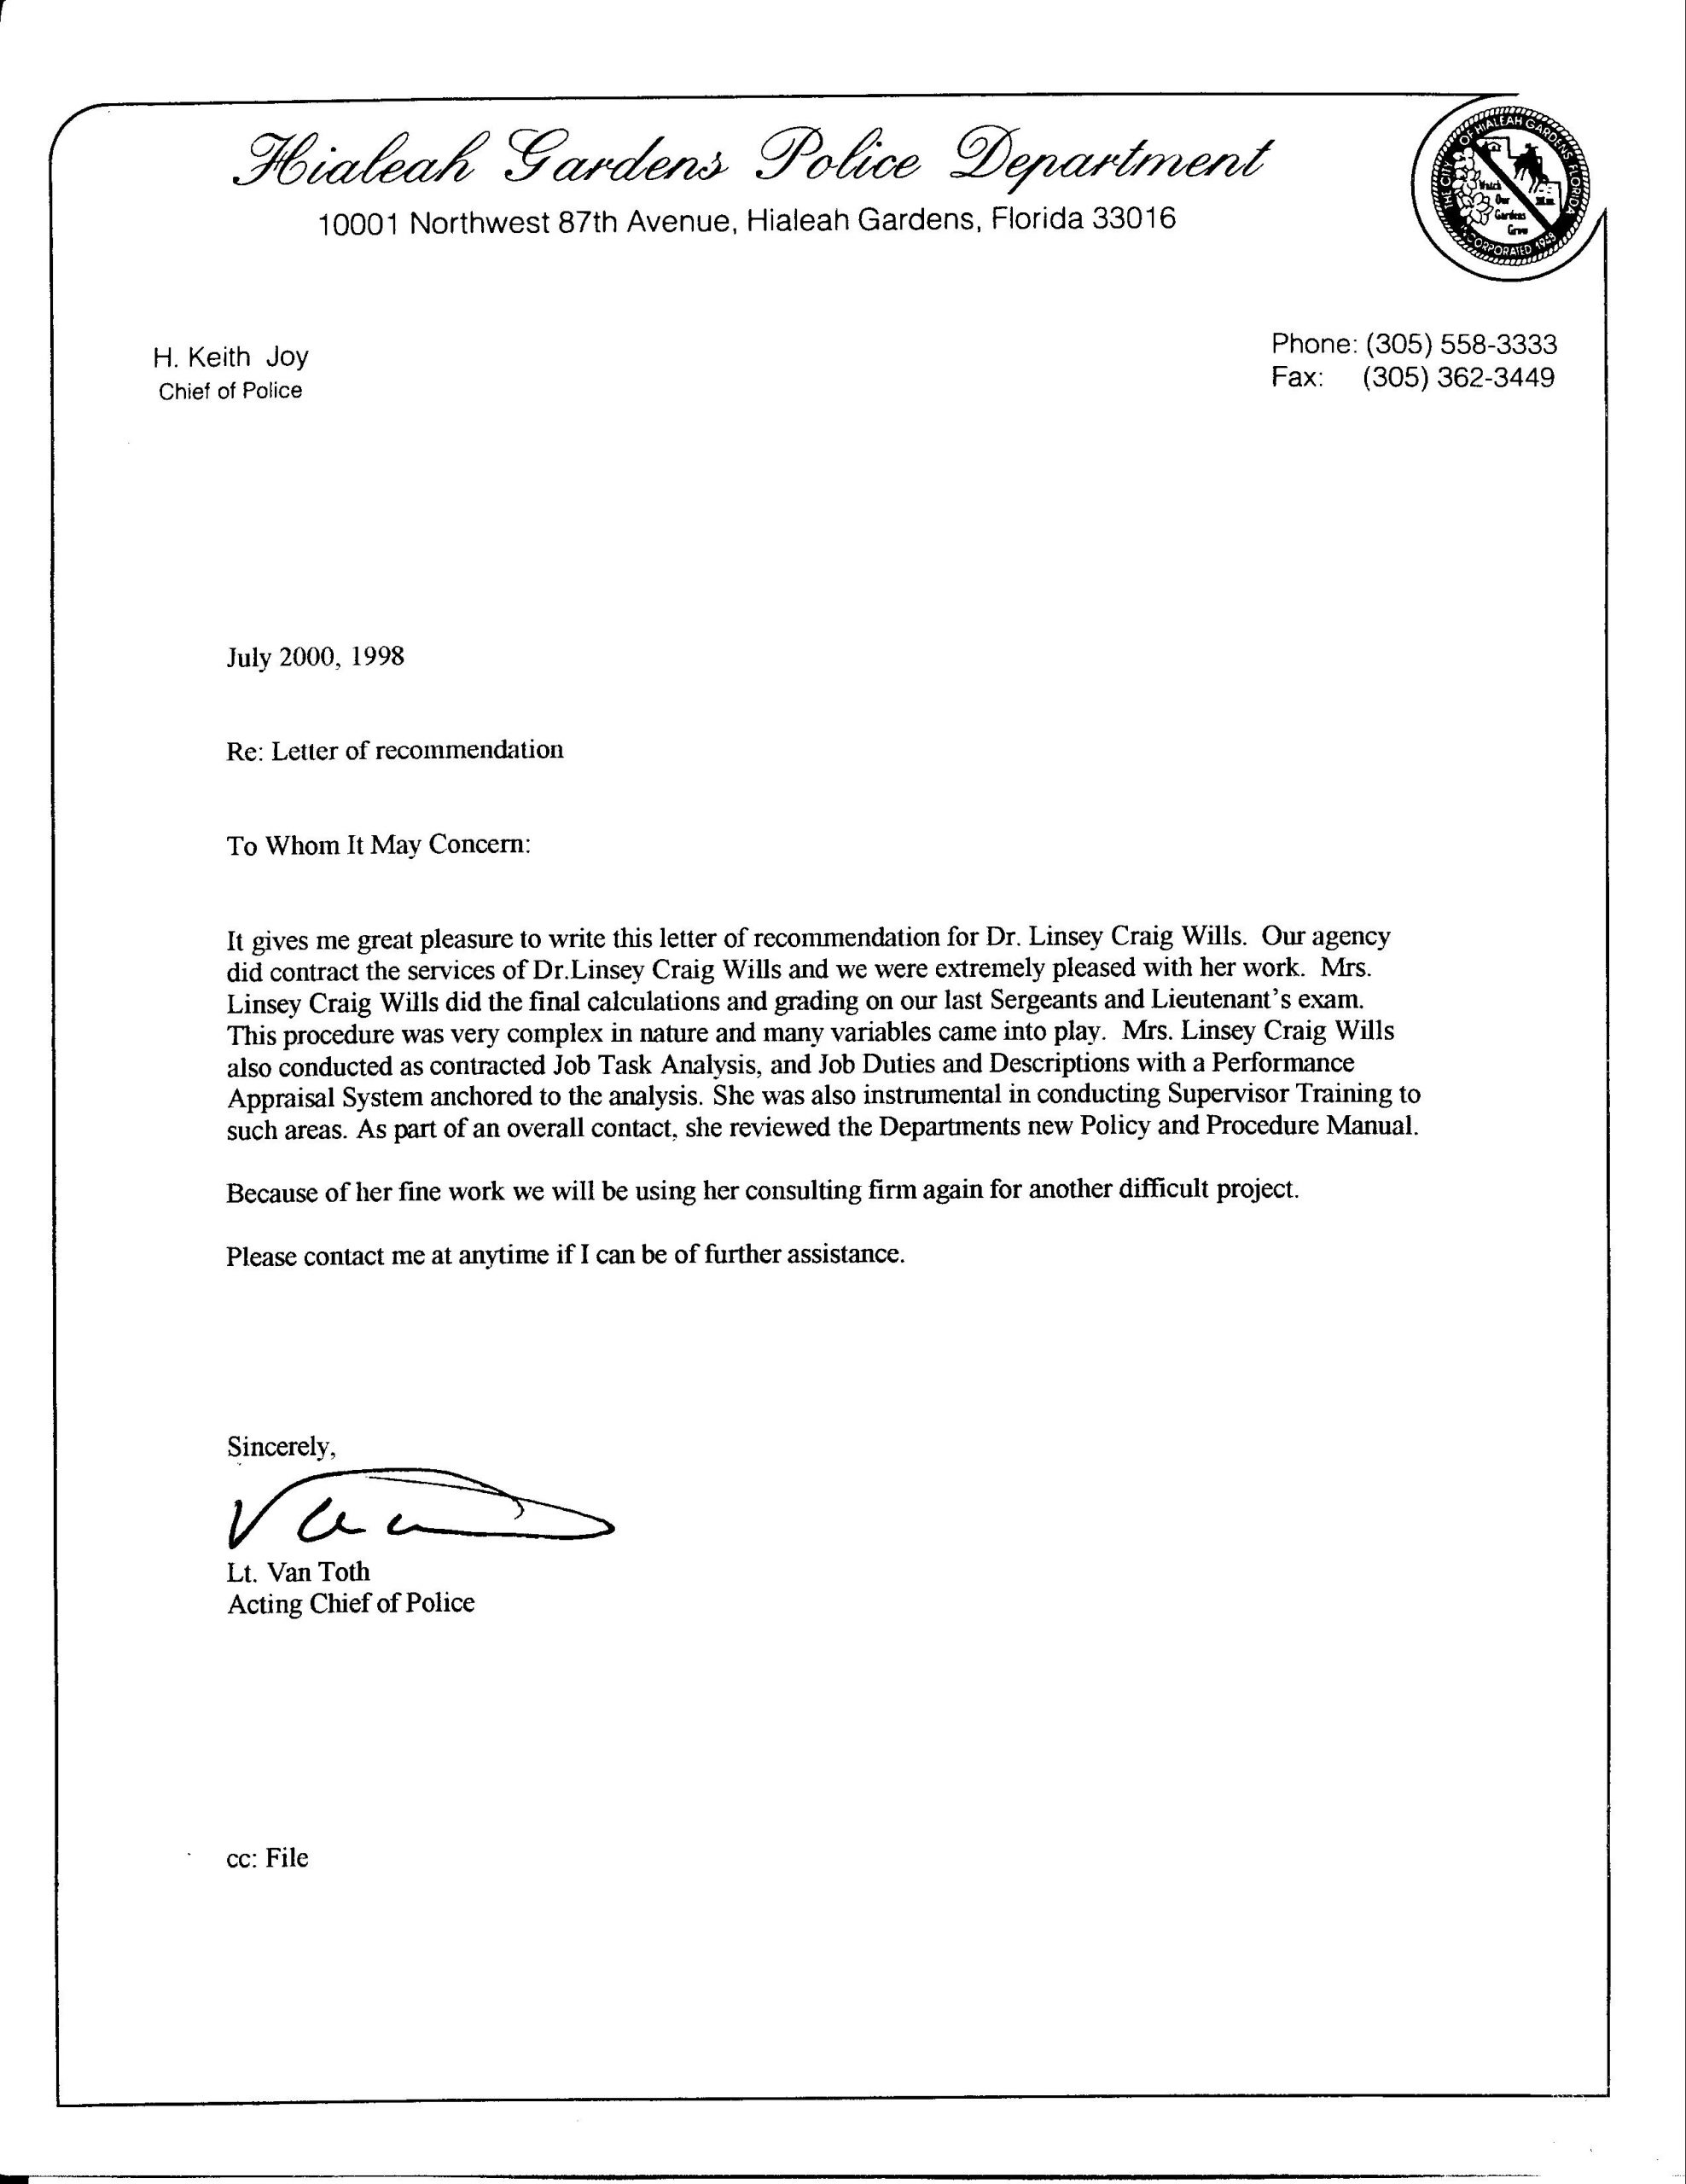 Police Officer Recommendation Letter Sample Debandje with dimensions 2547 X 3300